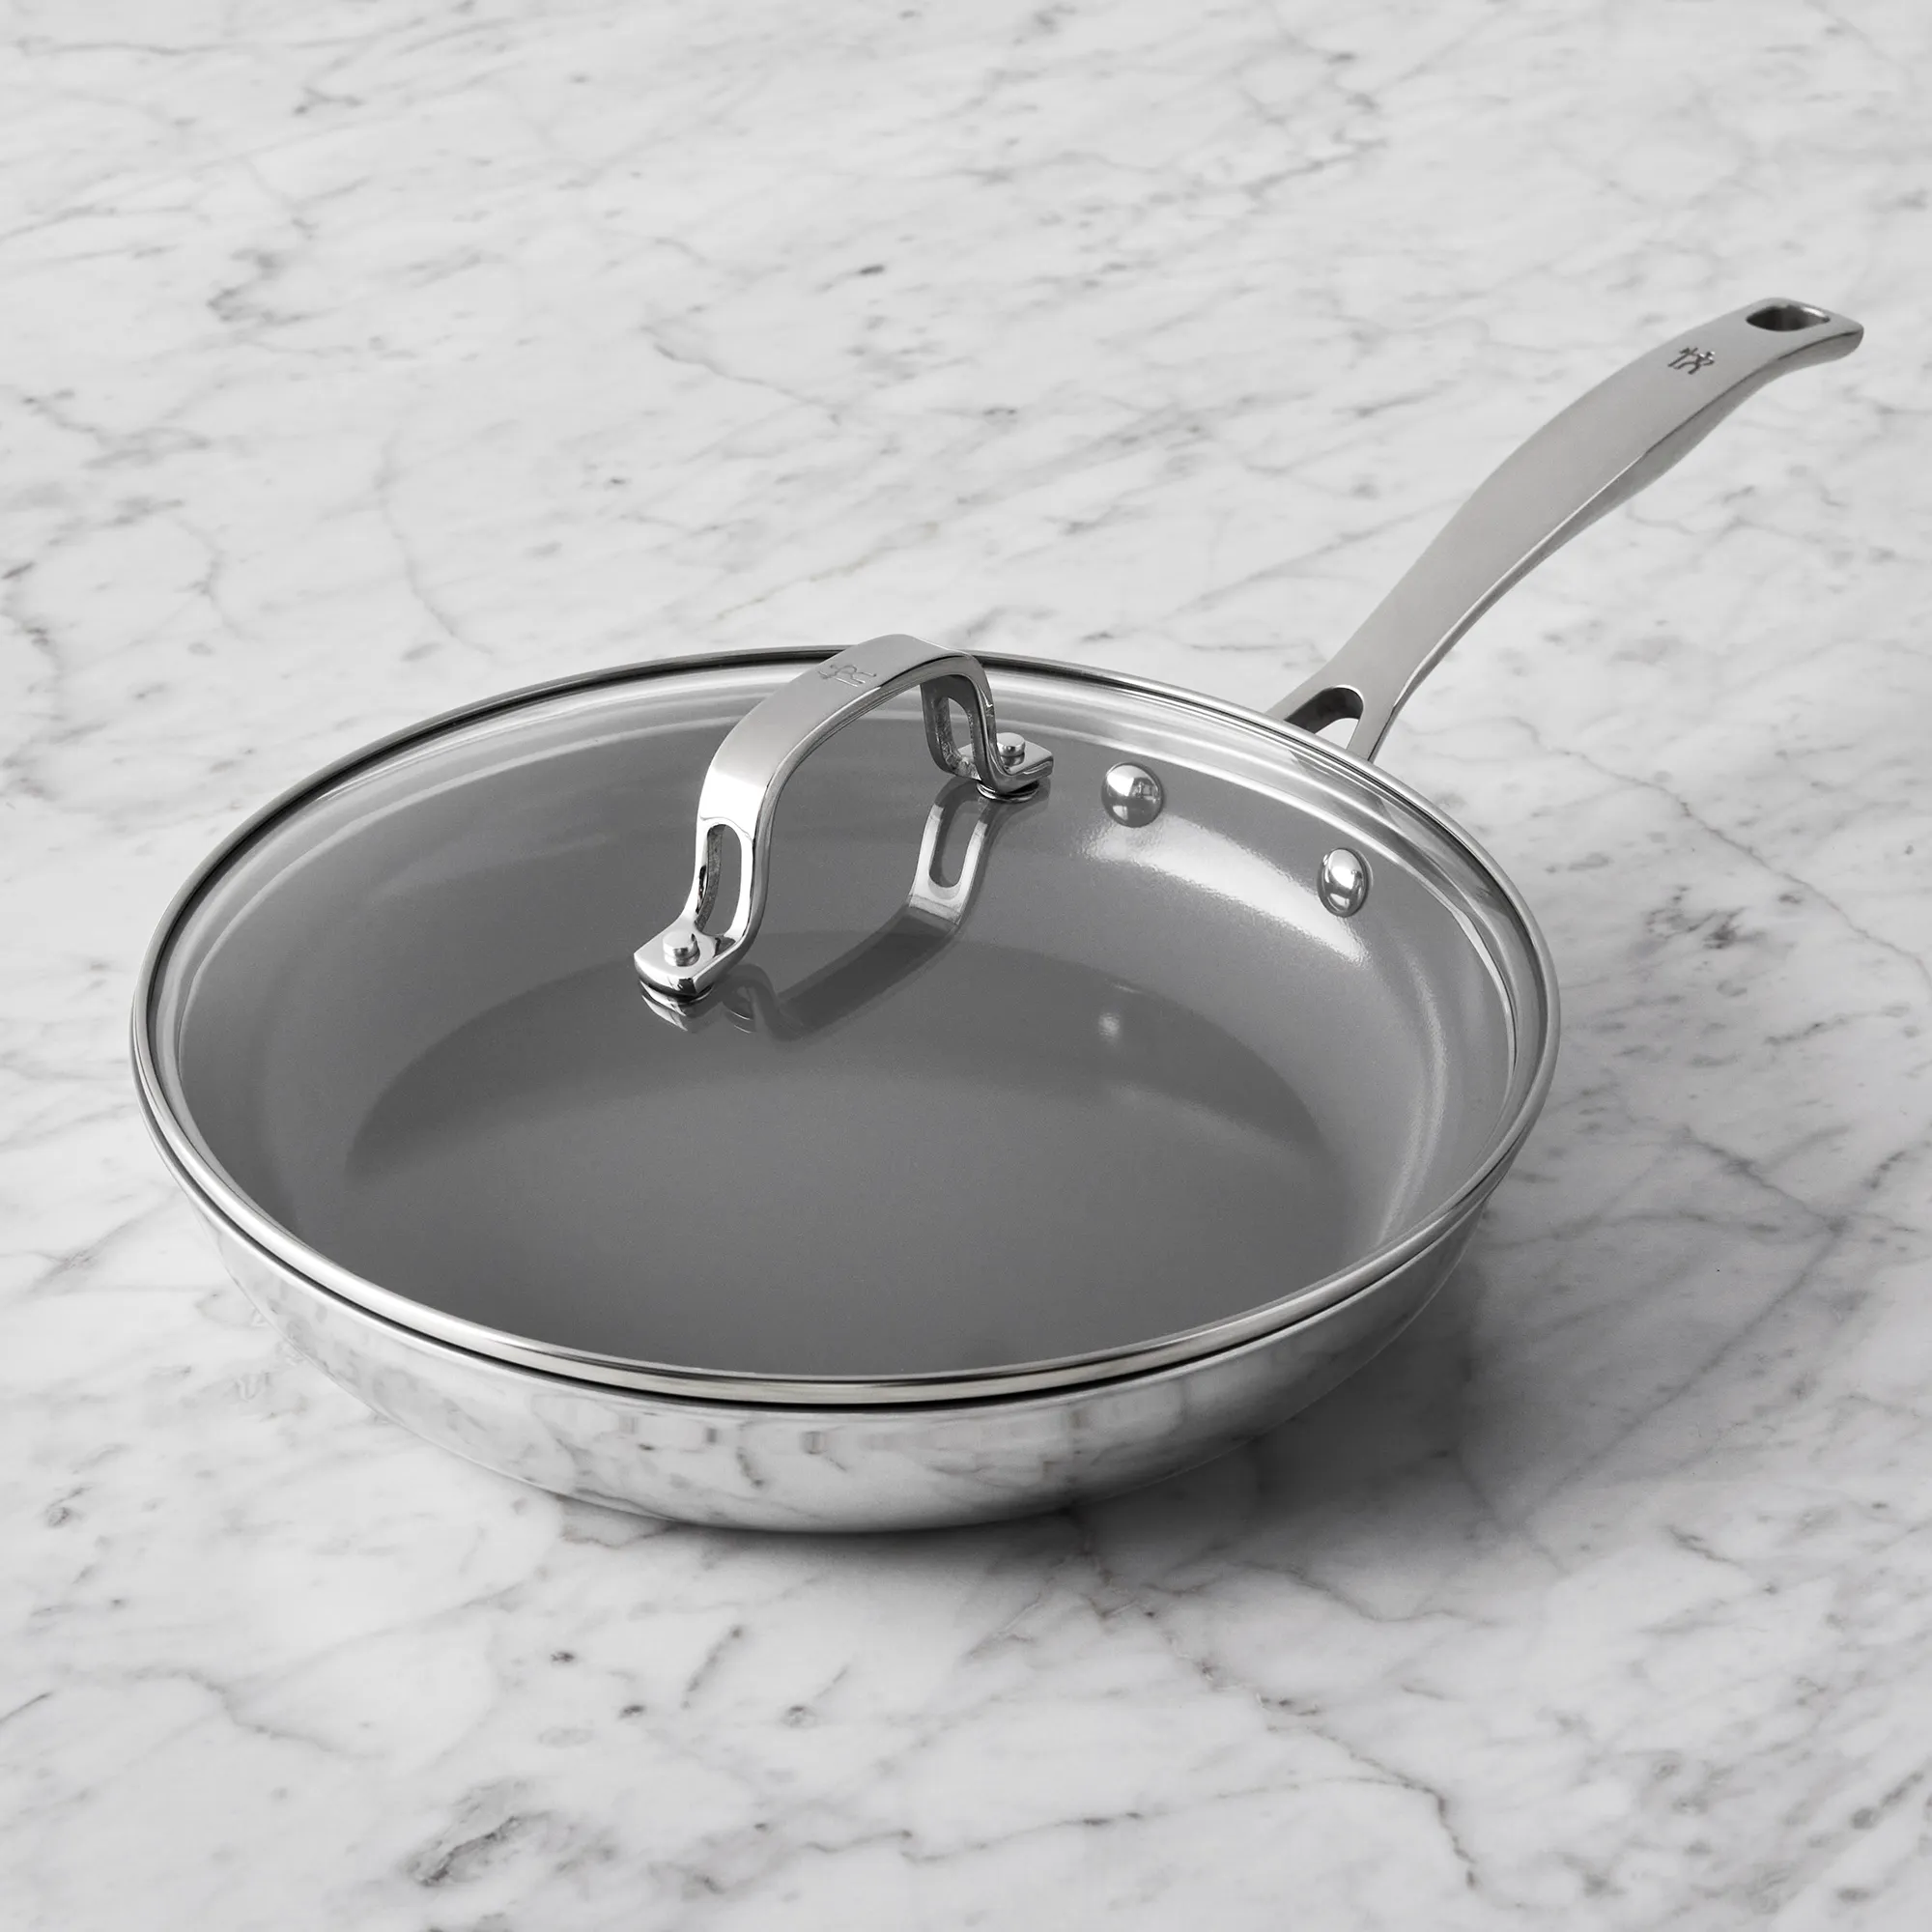 https://www.homethreads.com/files/zwilling/1023638-henckels-clad-h3-10-inch-stainless-steel-ceramic-nonstick-fry-pan-with-lid-5.webp